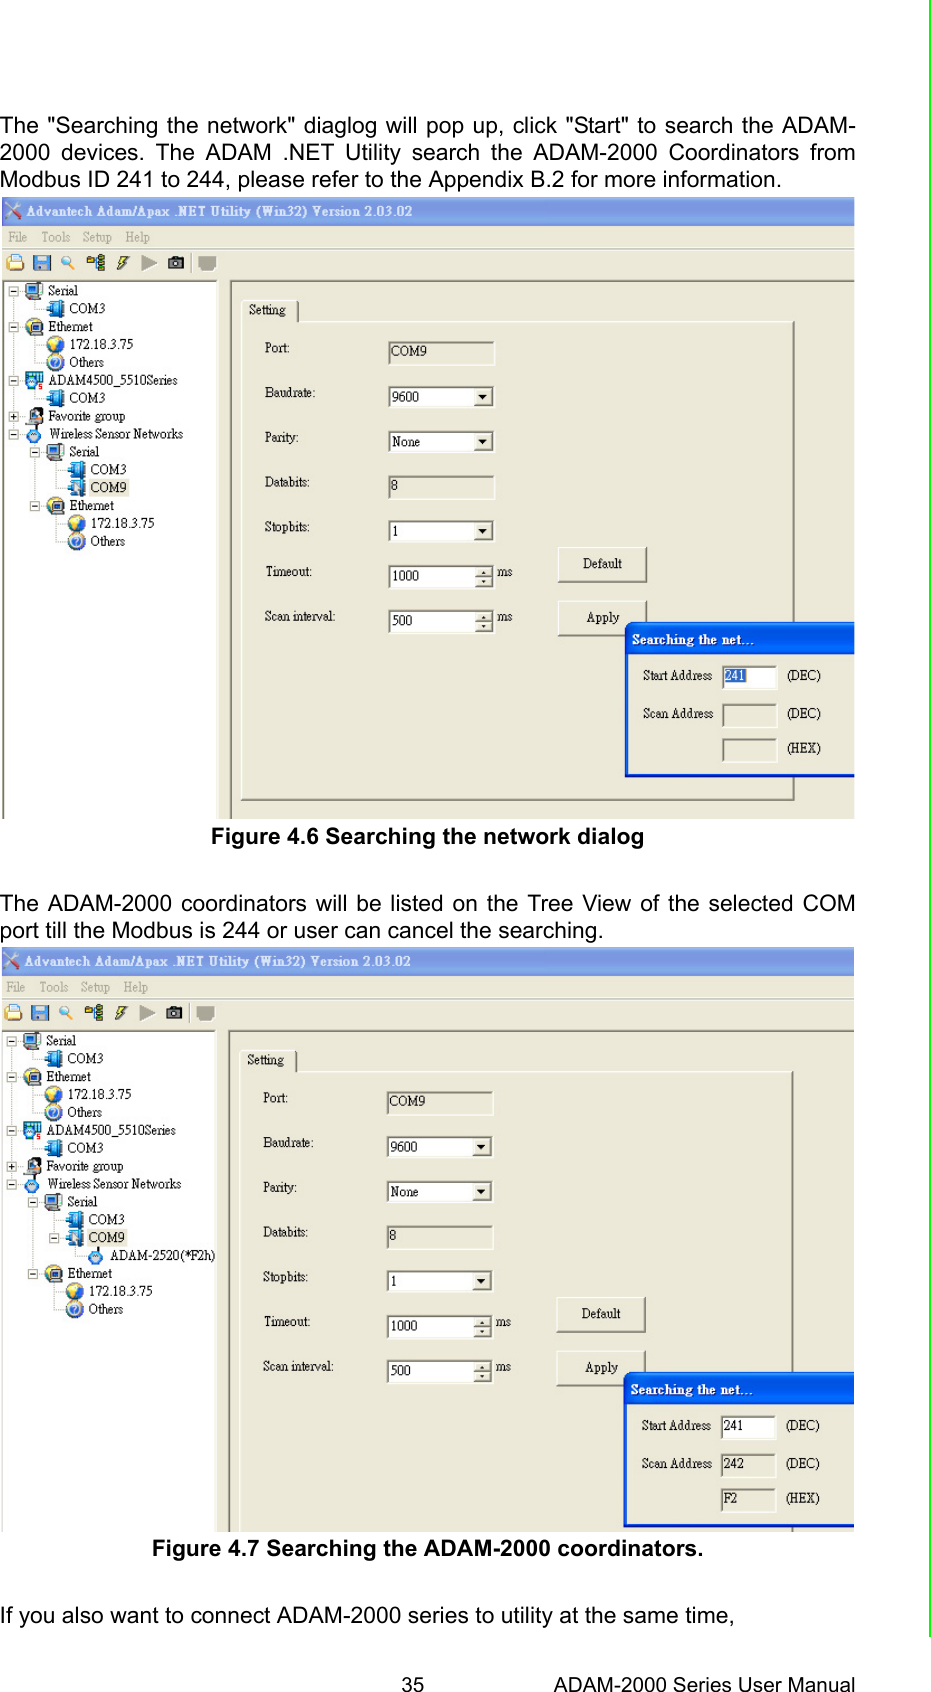 35 ADAM-2000 Series User ManualChapter 4 Software Configuration GuideThe &quot;Searching the network&quot; diaglog will pop up, click &quot;Start&quot; to search the ADAM-2000 devices. The ADAM .NET Utility search the ADAM-2000 Coordinators fromModbus ID 241 to 244, please refer to the Appendix B.2 for more information.Figure 4.6 Searching the network dialogThe ADAM-2000 coordinators will be listed on the Tree View of the selected COMport till the Modbus is 244 or user can cancel the searching.Figure 4.7 Searching the ADAM-2000 coordinators.If you also want to connect ADAM-2000 series to utility at the same time, 